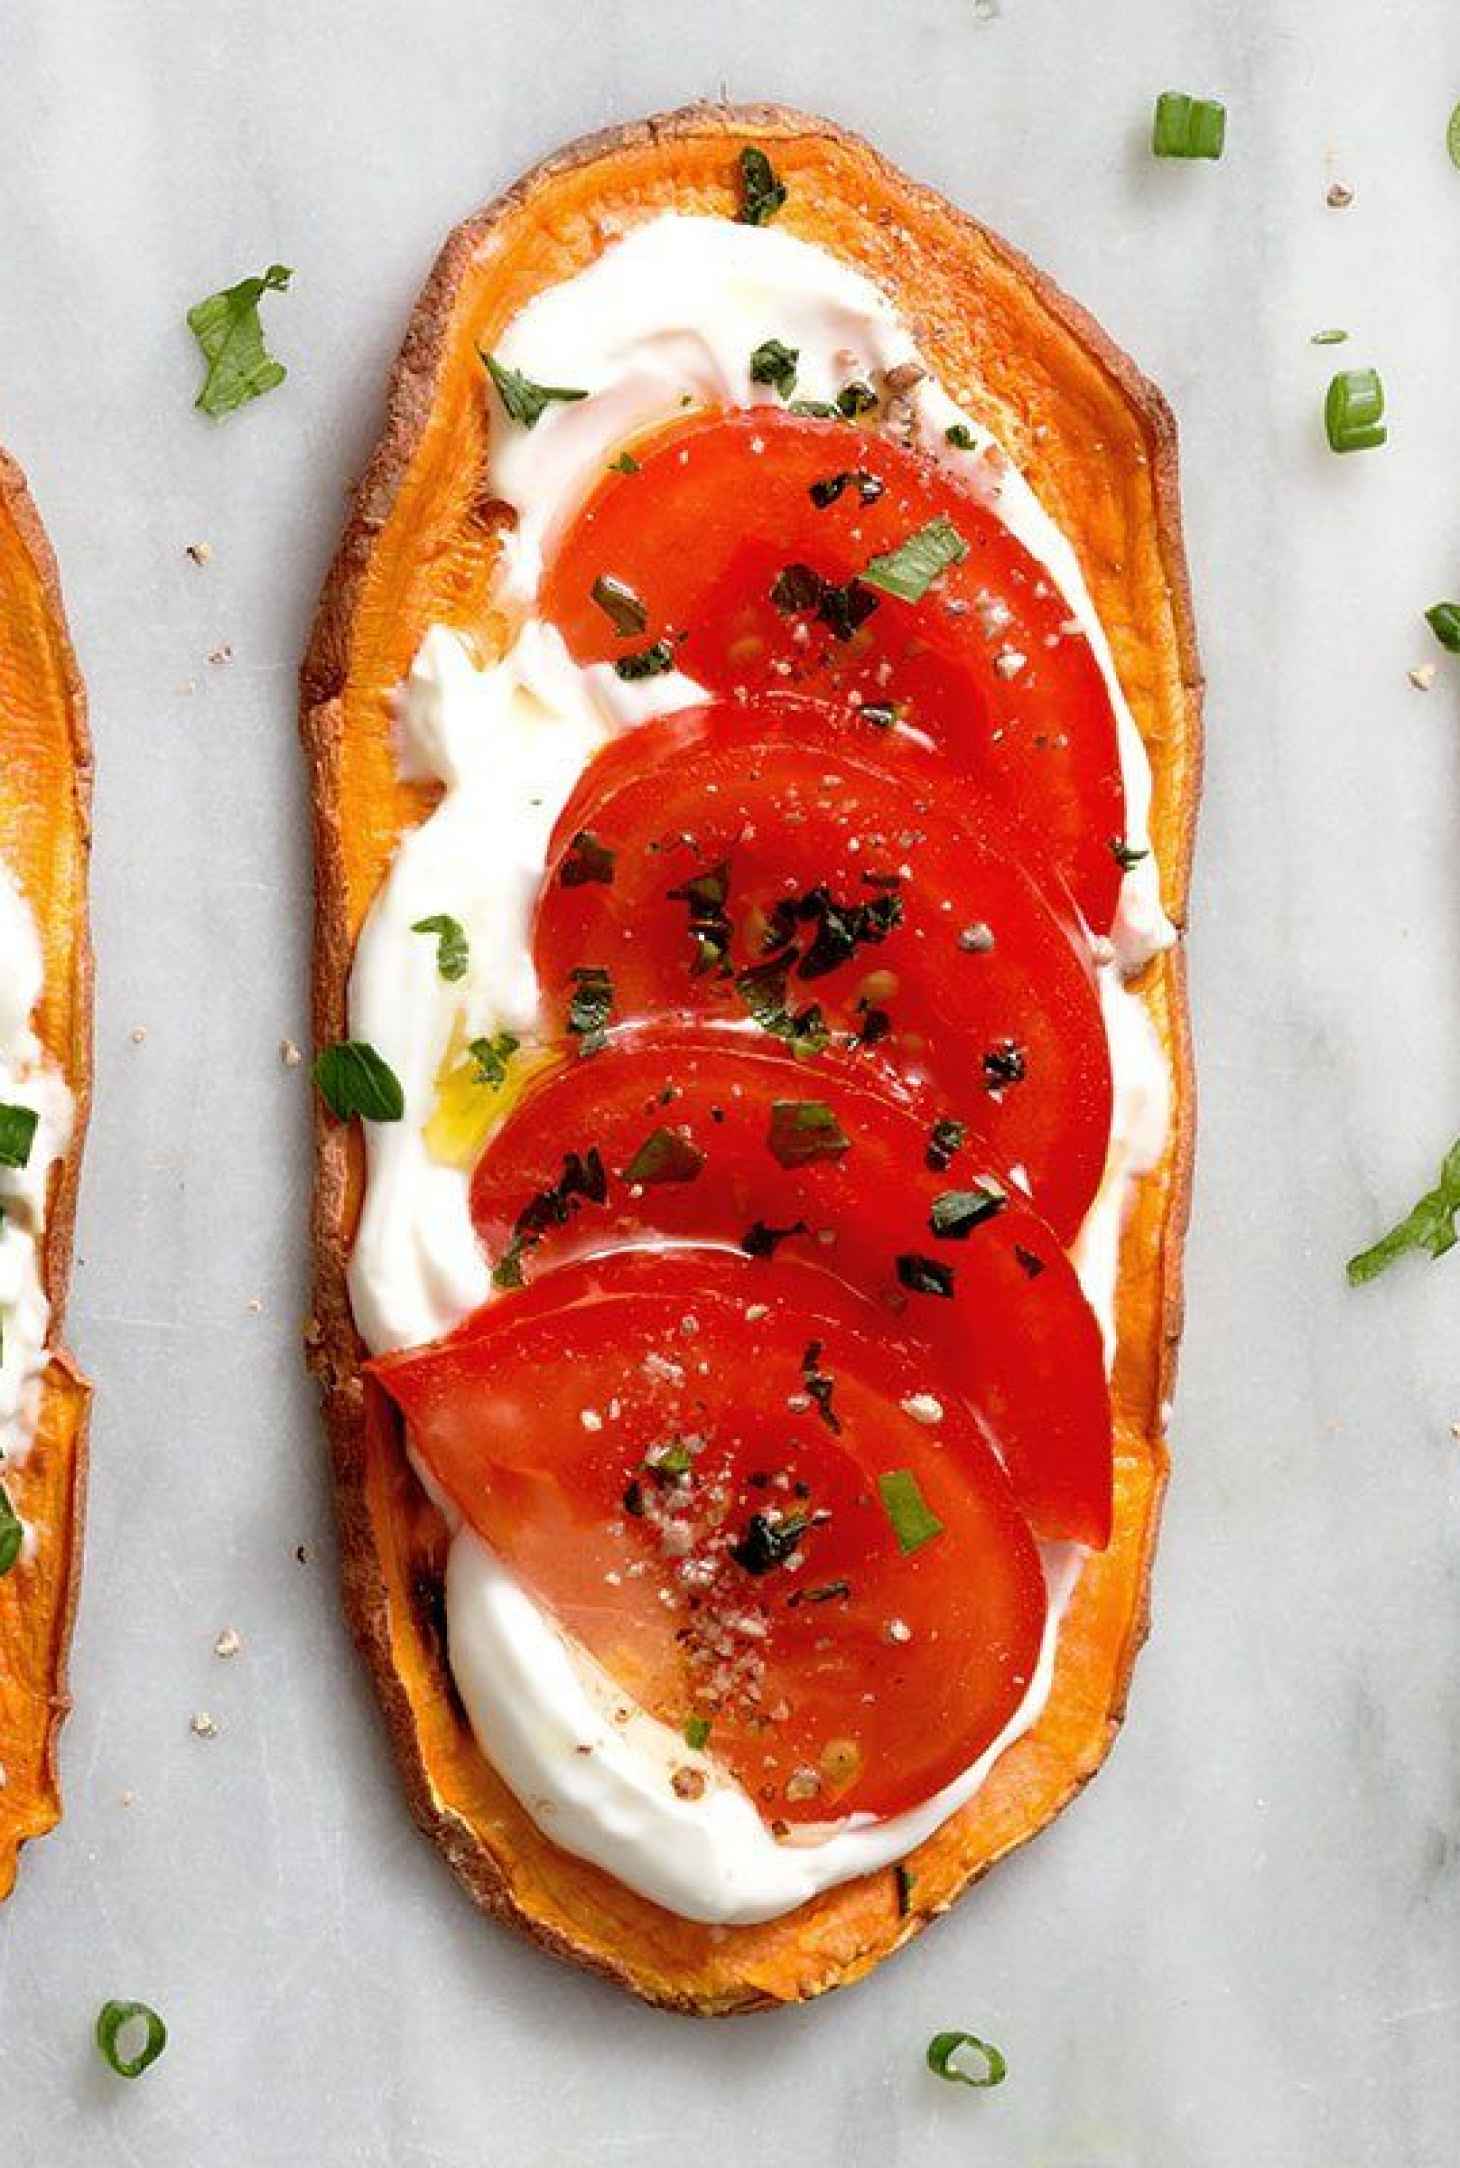 Breakfast Toast Recipes 12 Delicious Breakfast Toast Recipes To Brighten Your Mornings Eatwell101